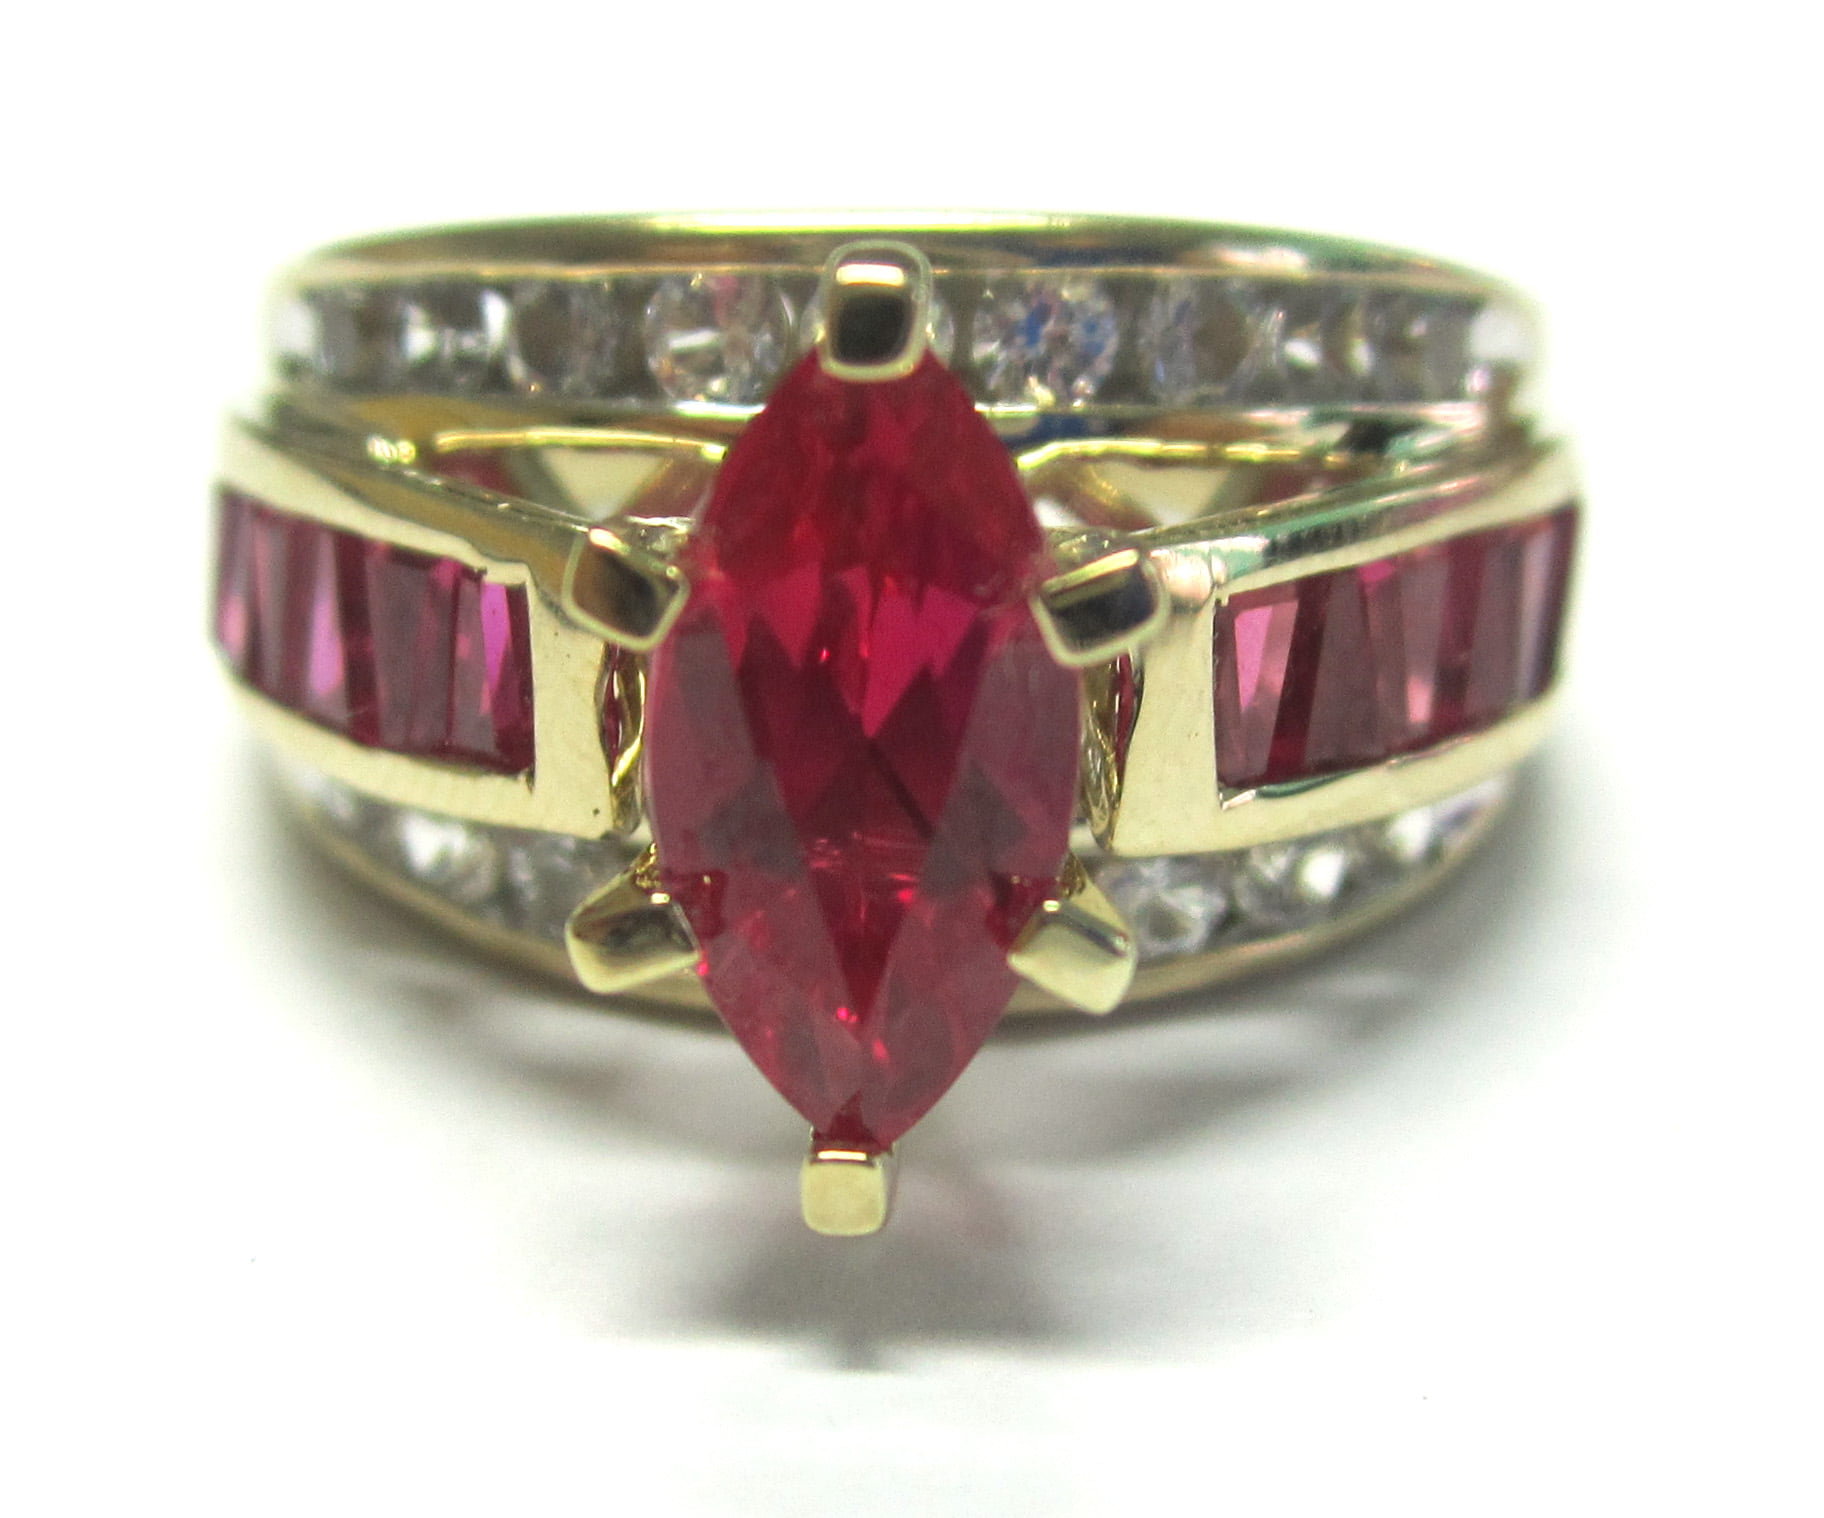 Star Ruby & Diamond Ring Sterling Silver or Yellow Gold Plated Silver Band 